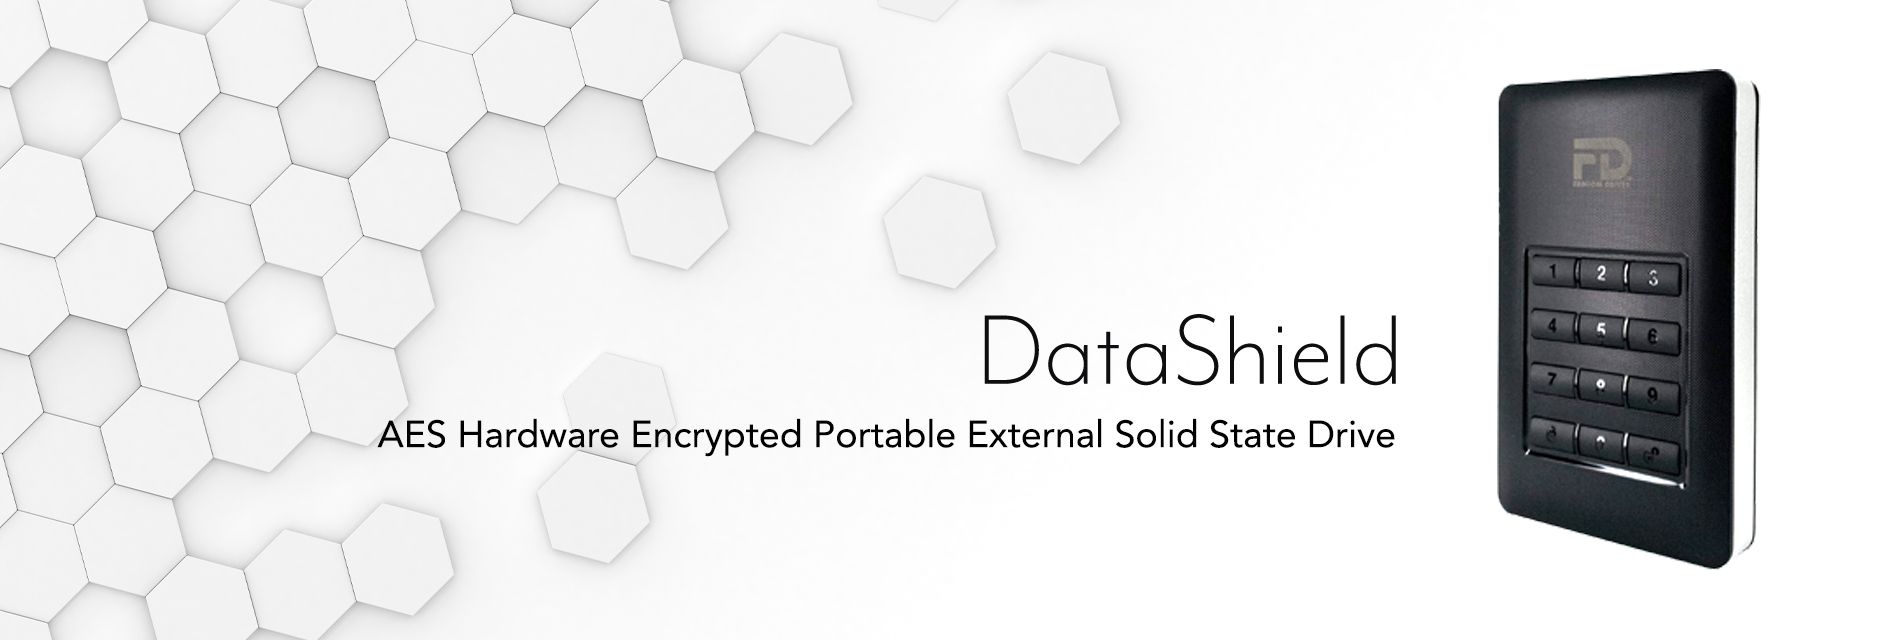 Datashield Encrypted Solid State Drive